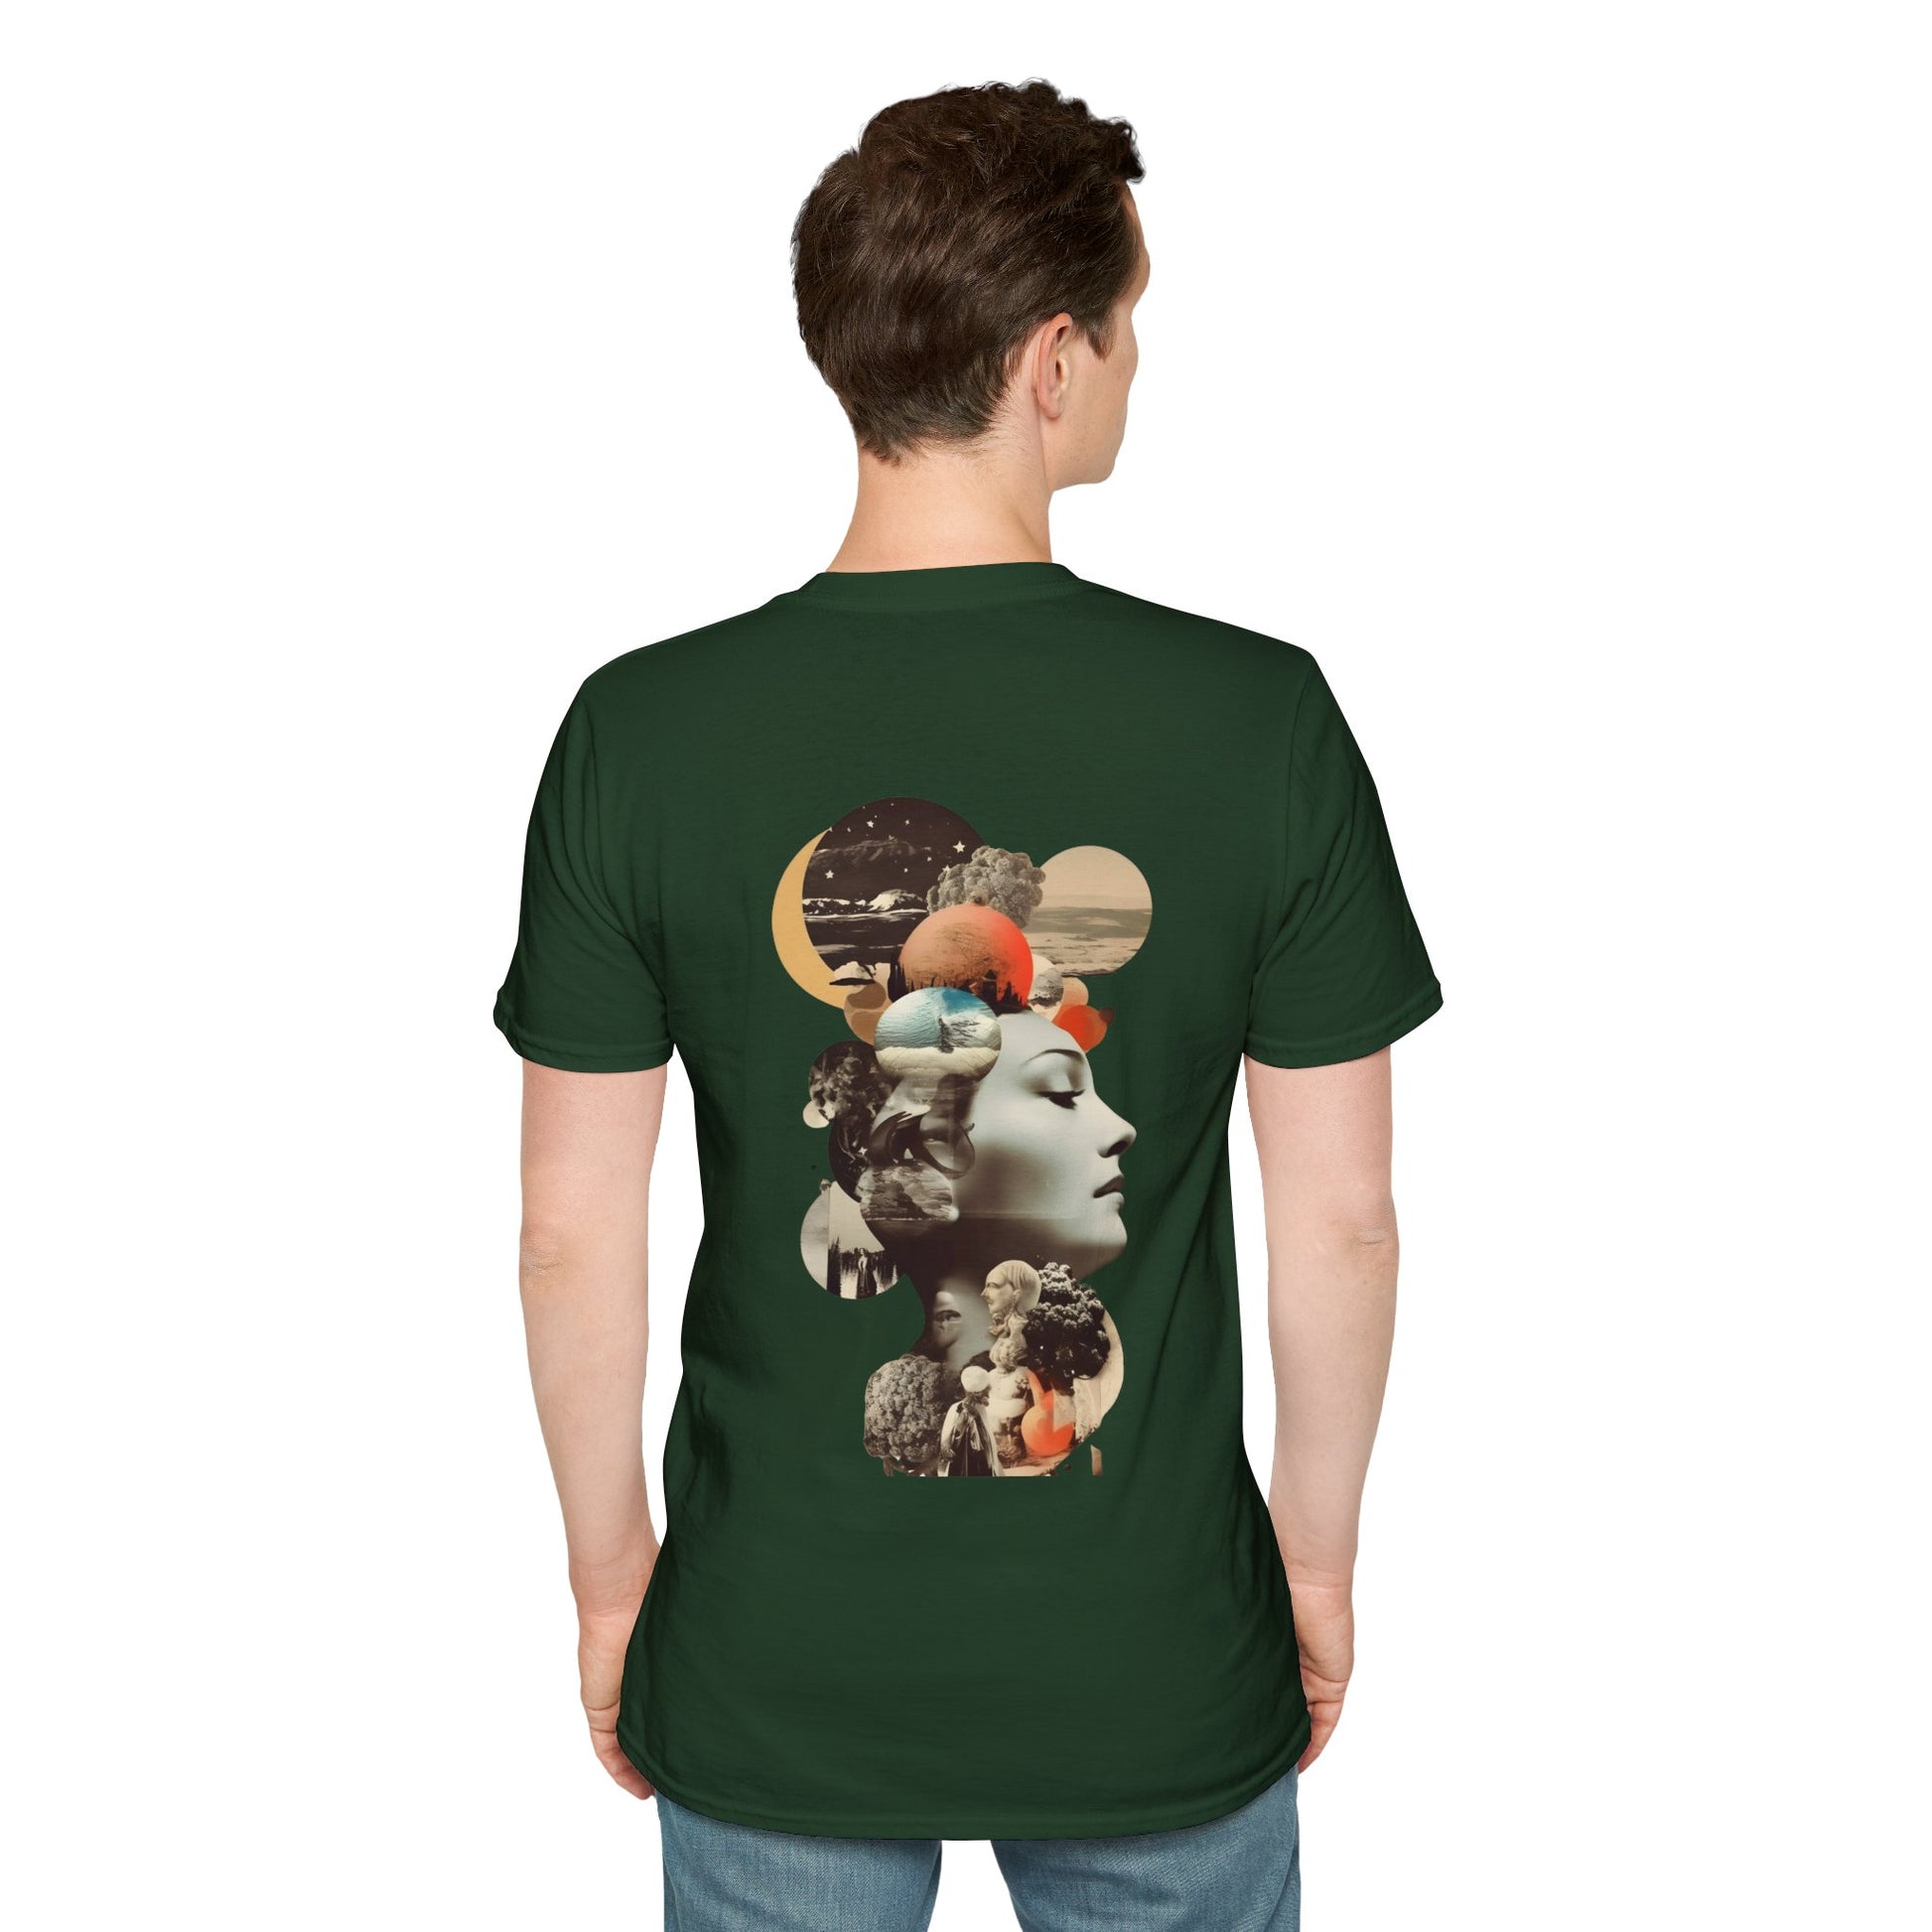 Green T-shirt with a collage of a mysterious figure surrounded by butterflies and roses